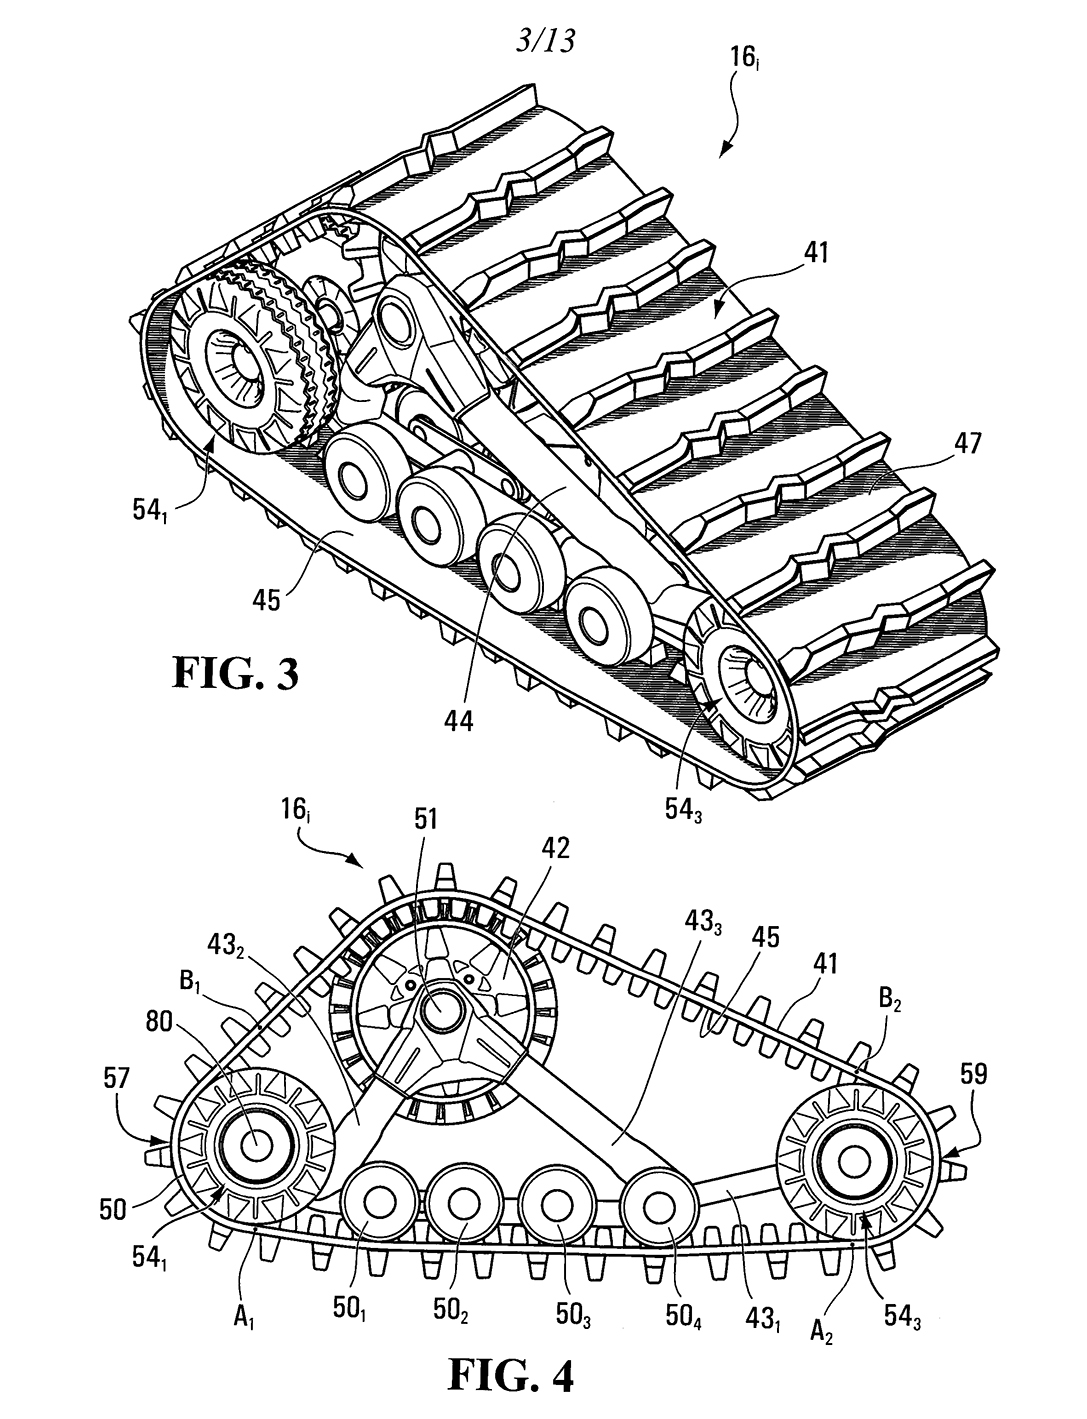 Drawing of a track assembly for an all-terrain vehicle or other tracked vehicle